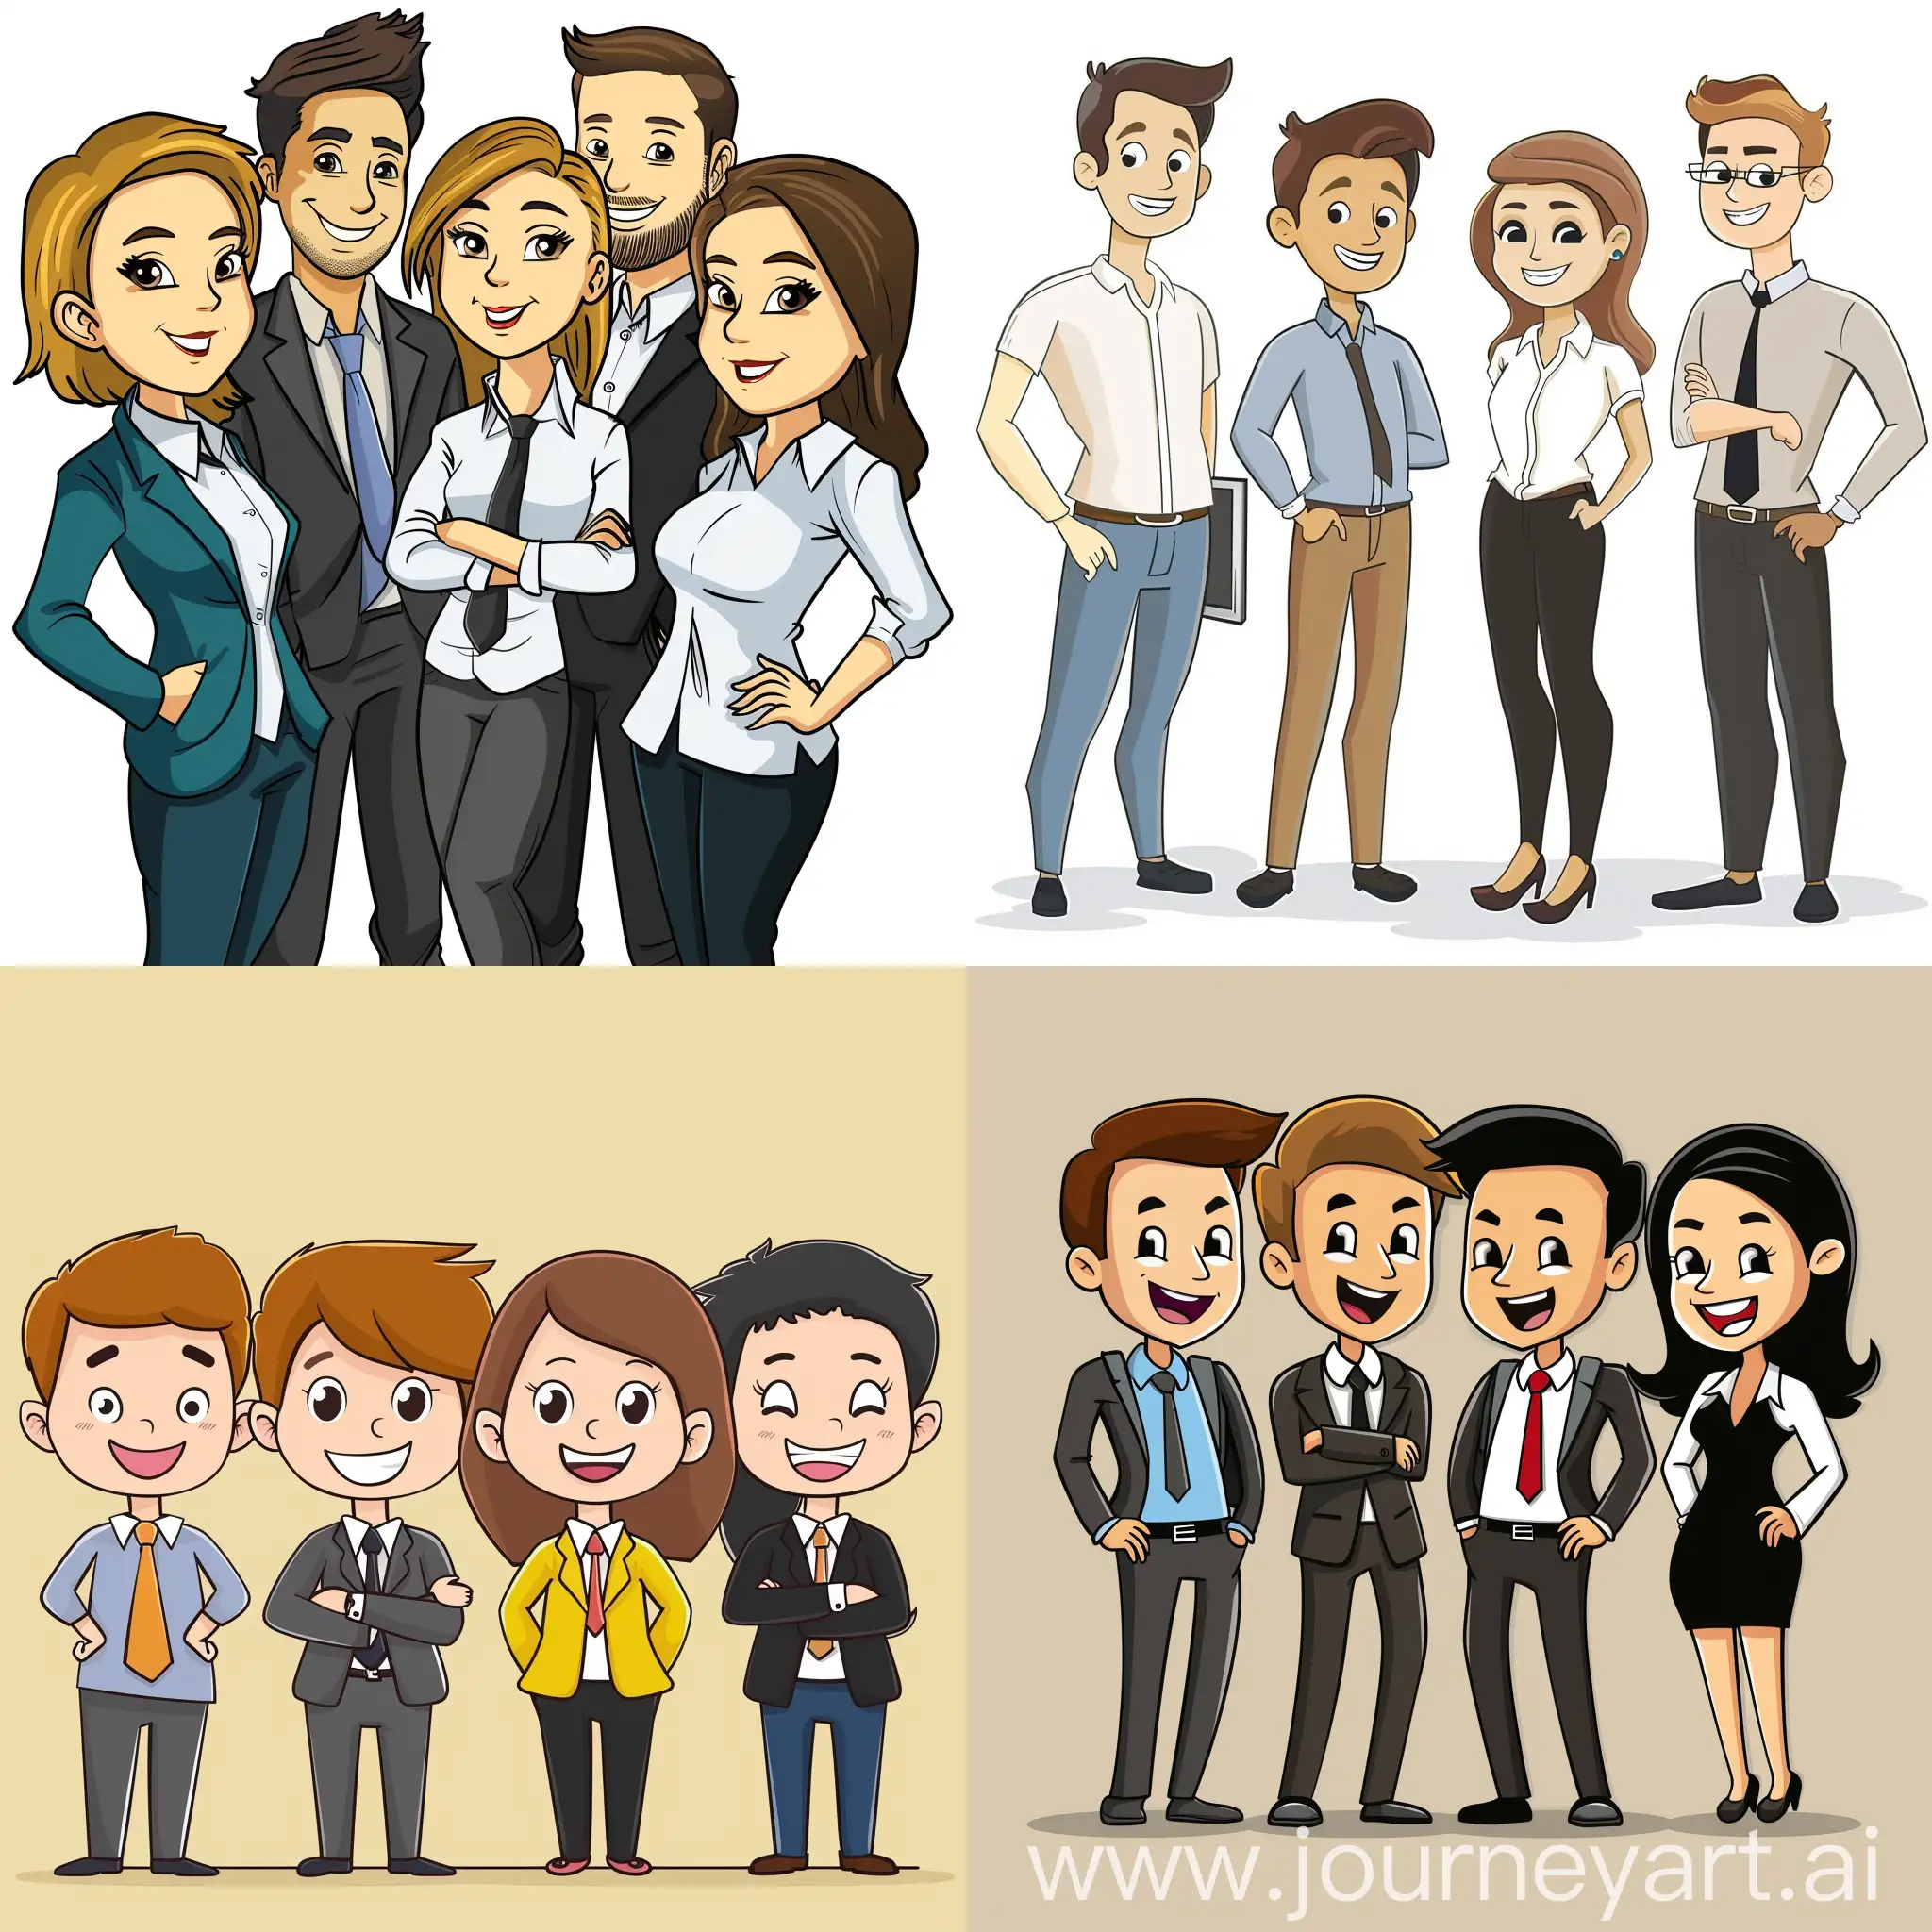 A friendly cartoon of four office workers in a cartoon style